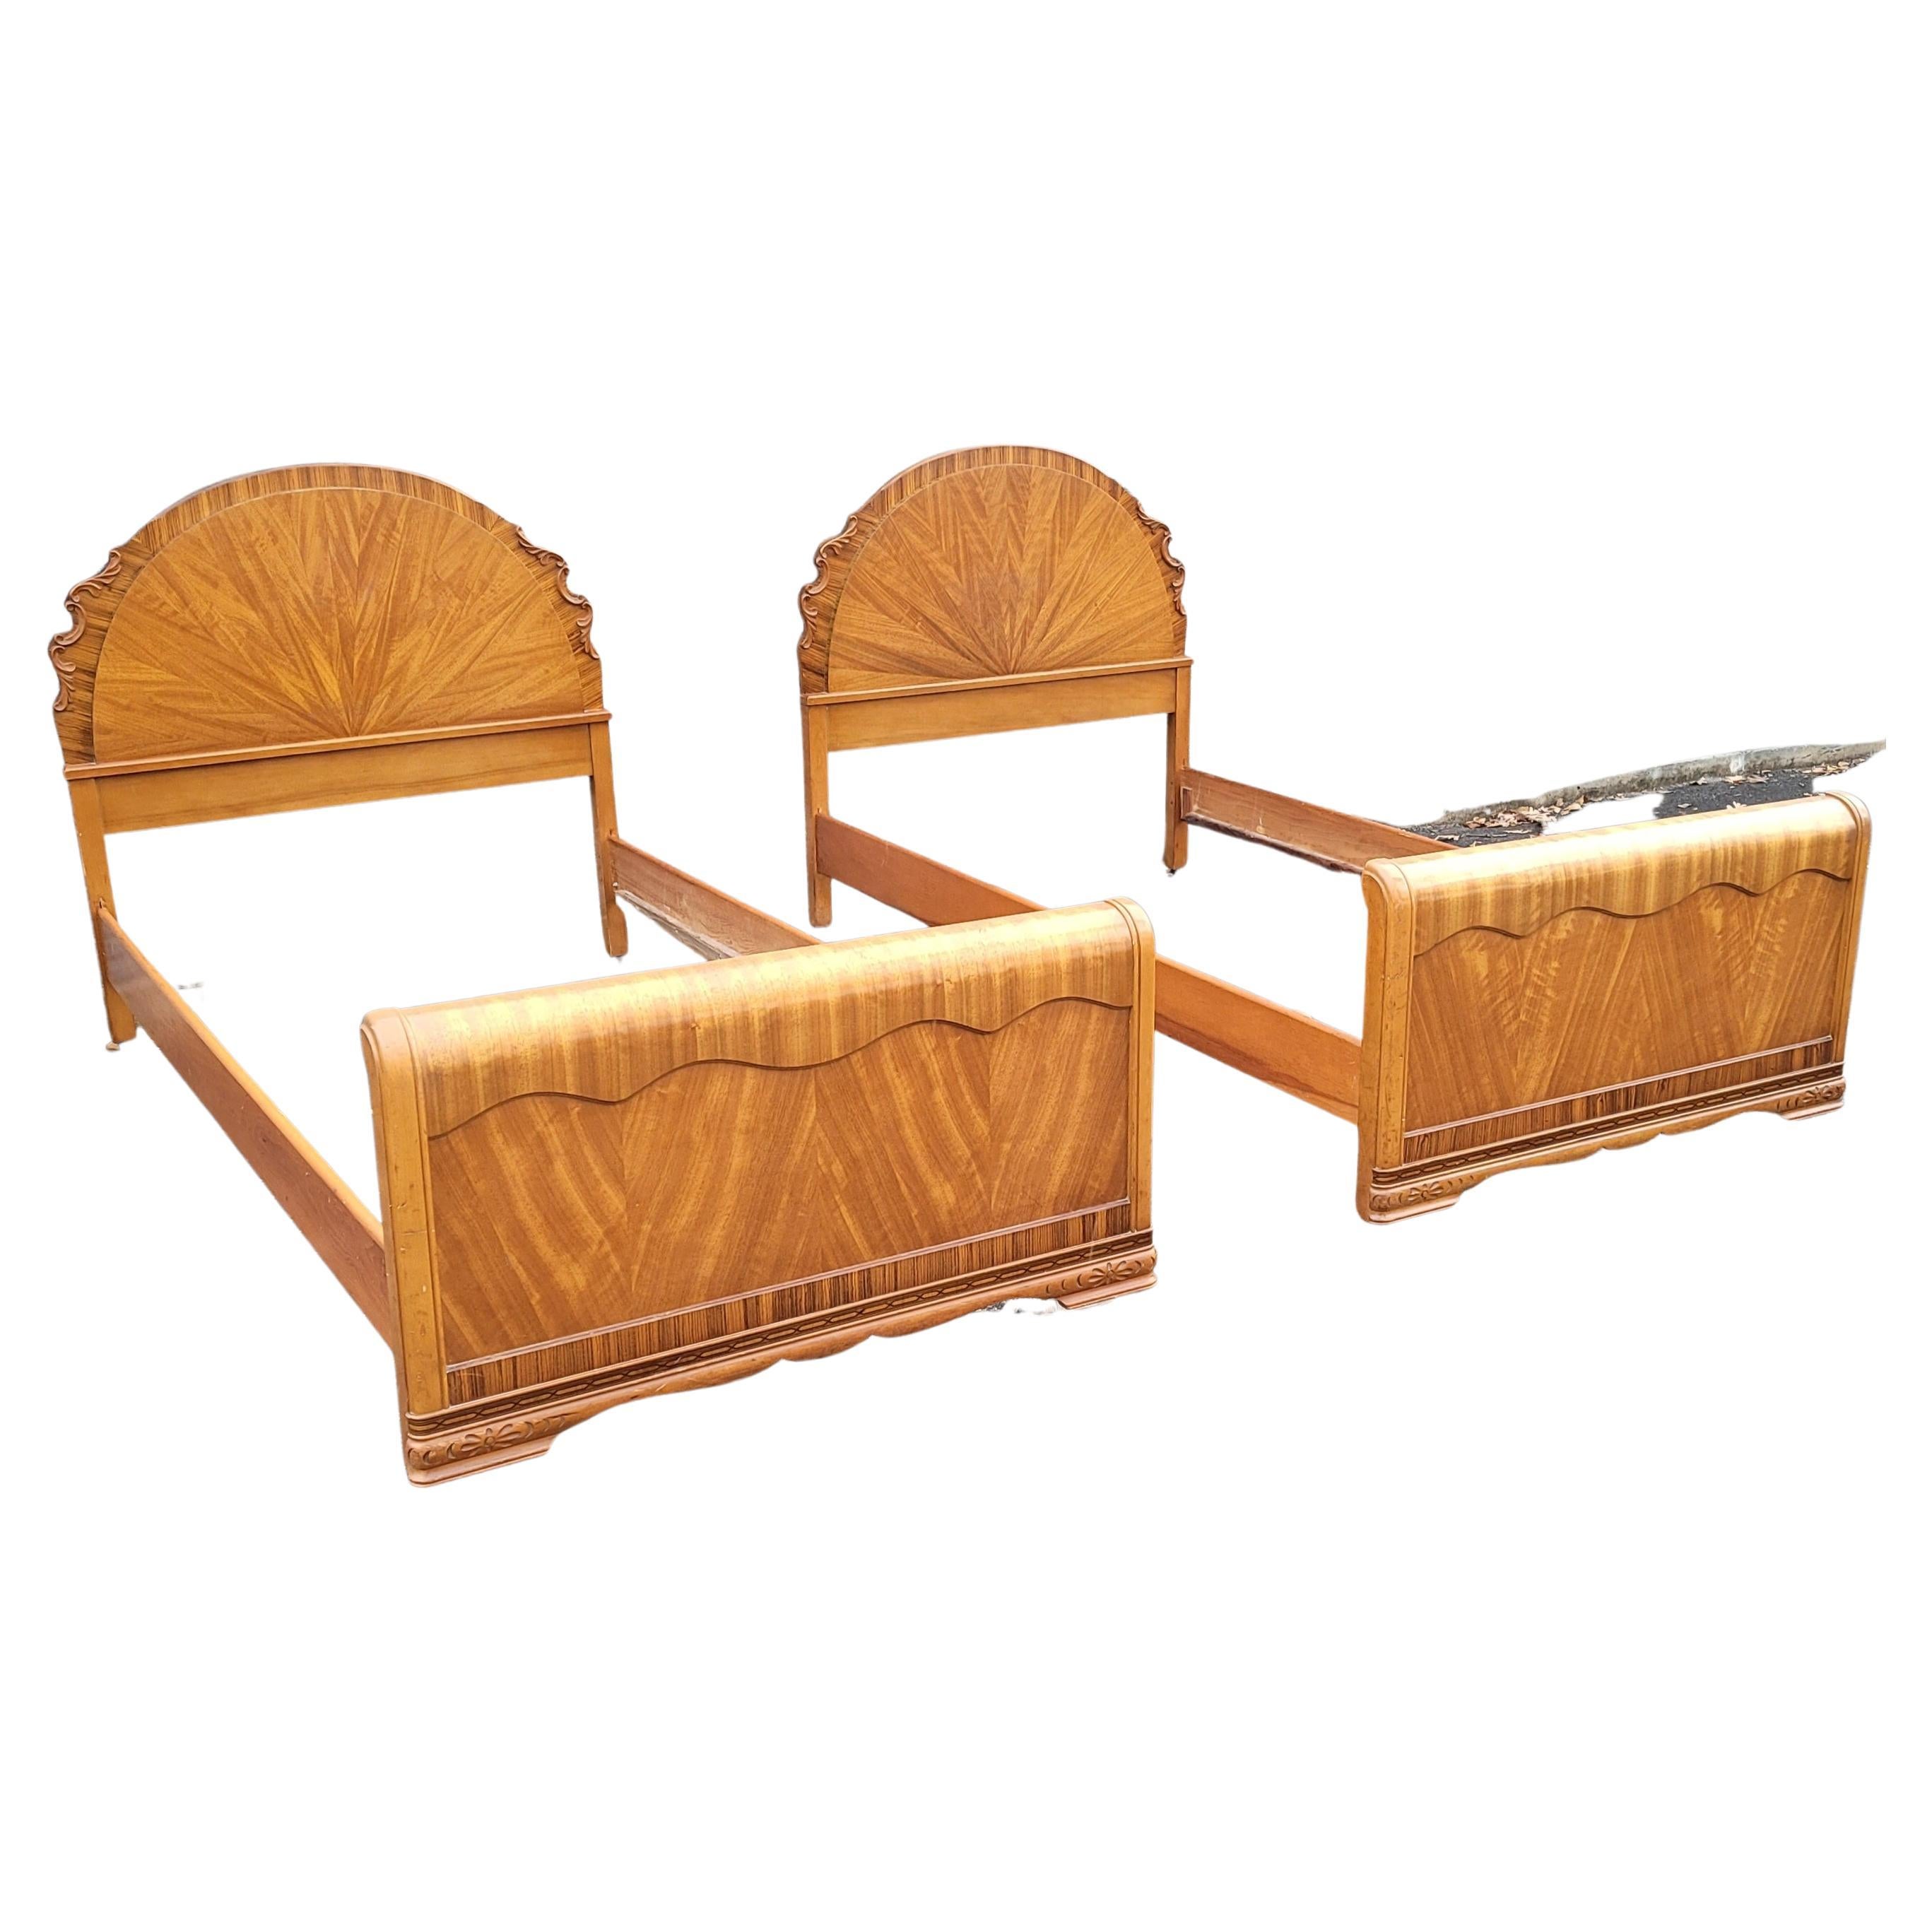 A Pair of 1930s Art Deco Mahogany Twin Size Bedsteads (Art déco) im Angebot